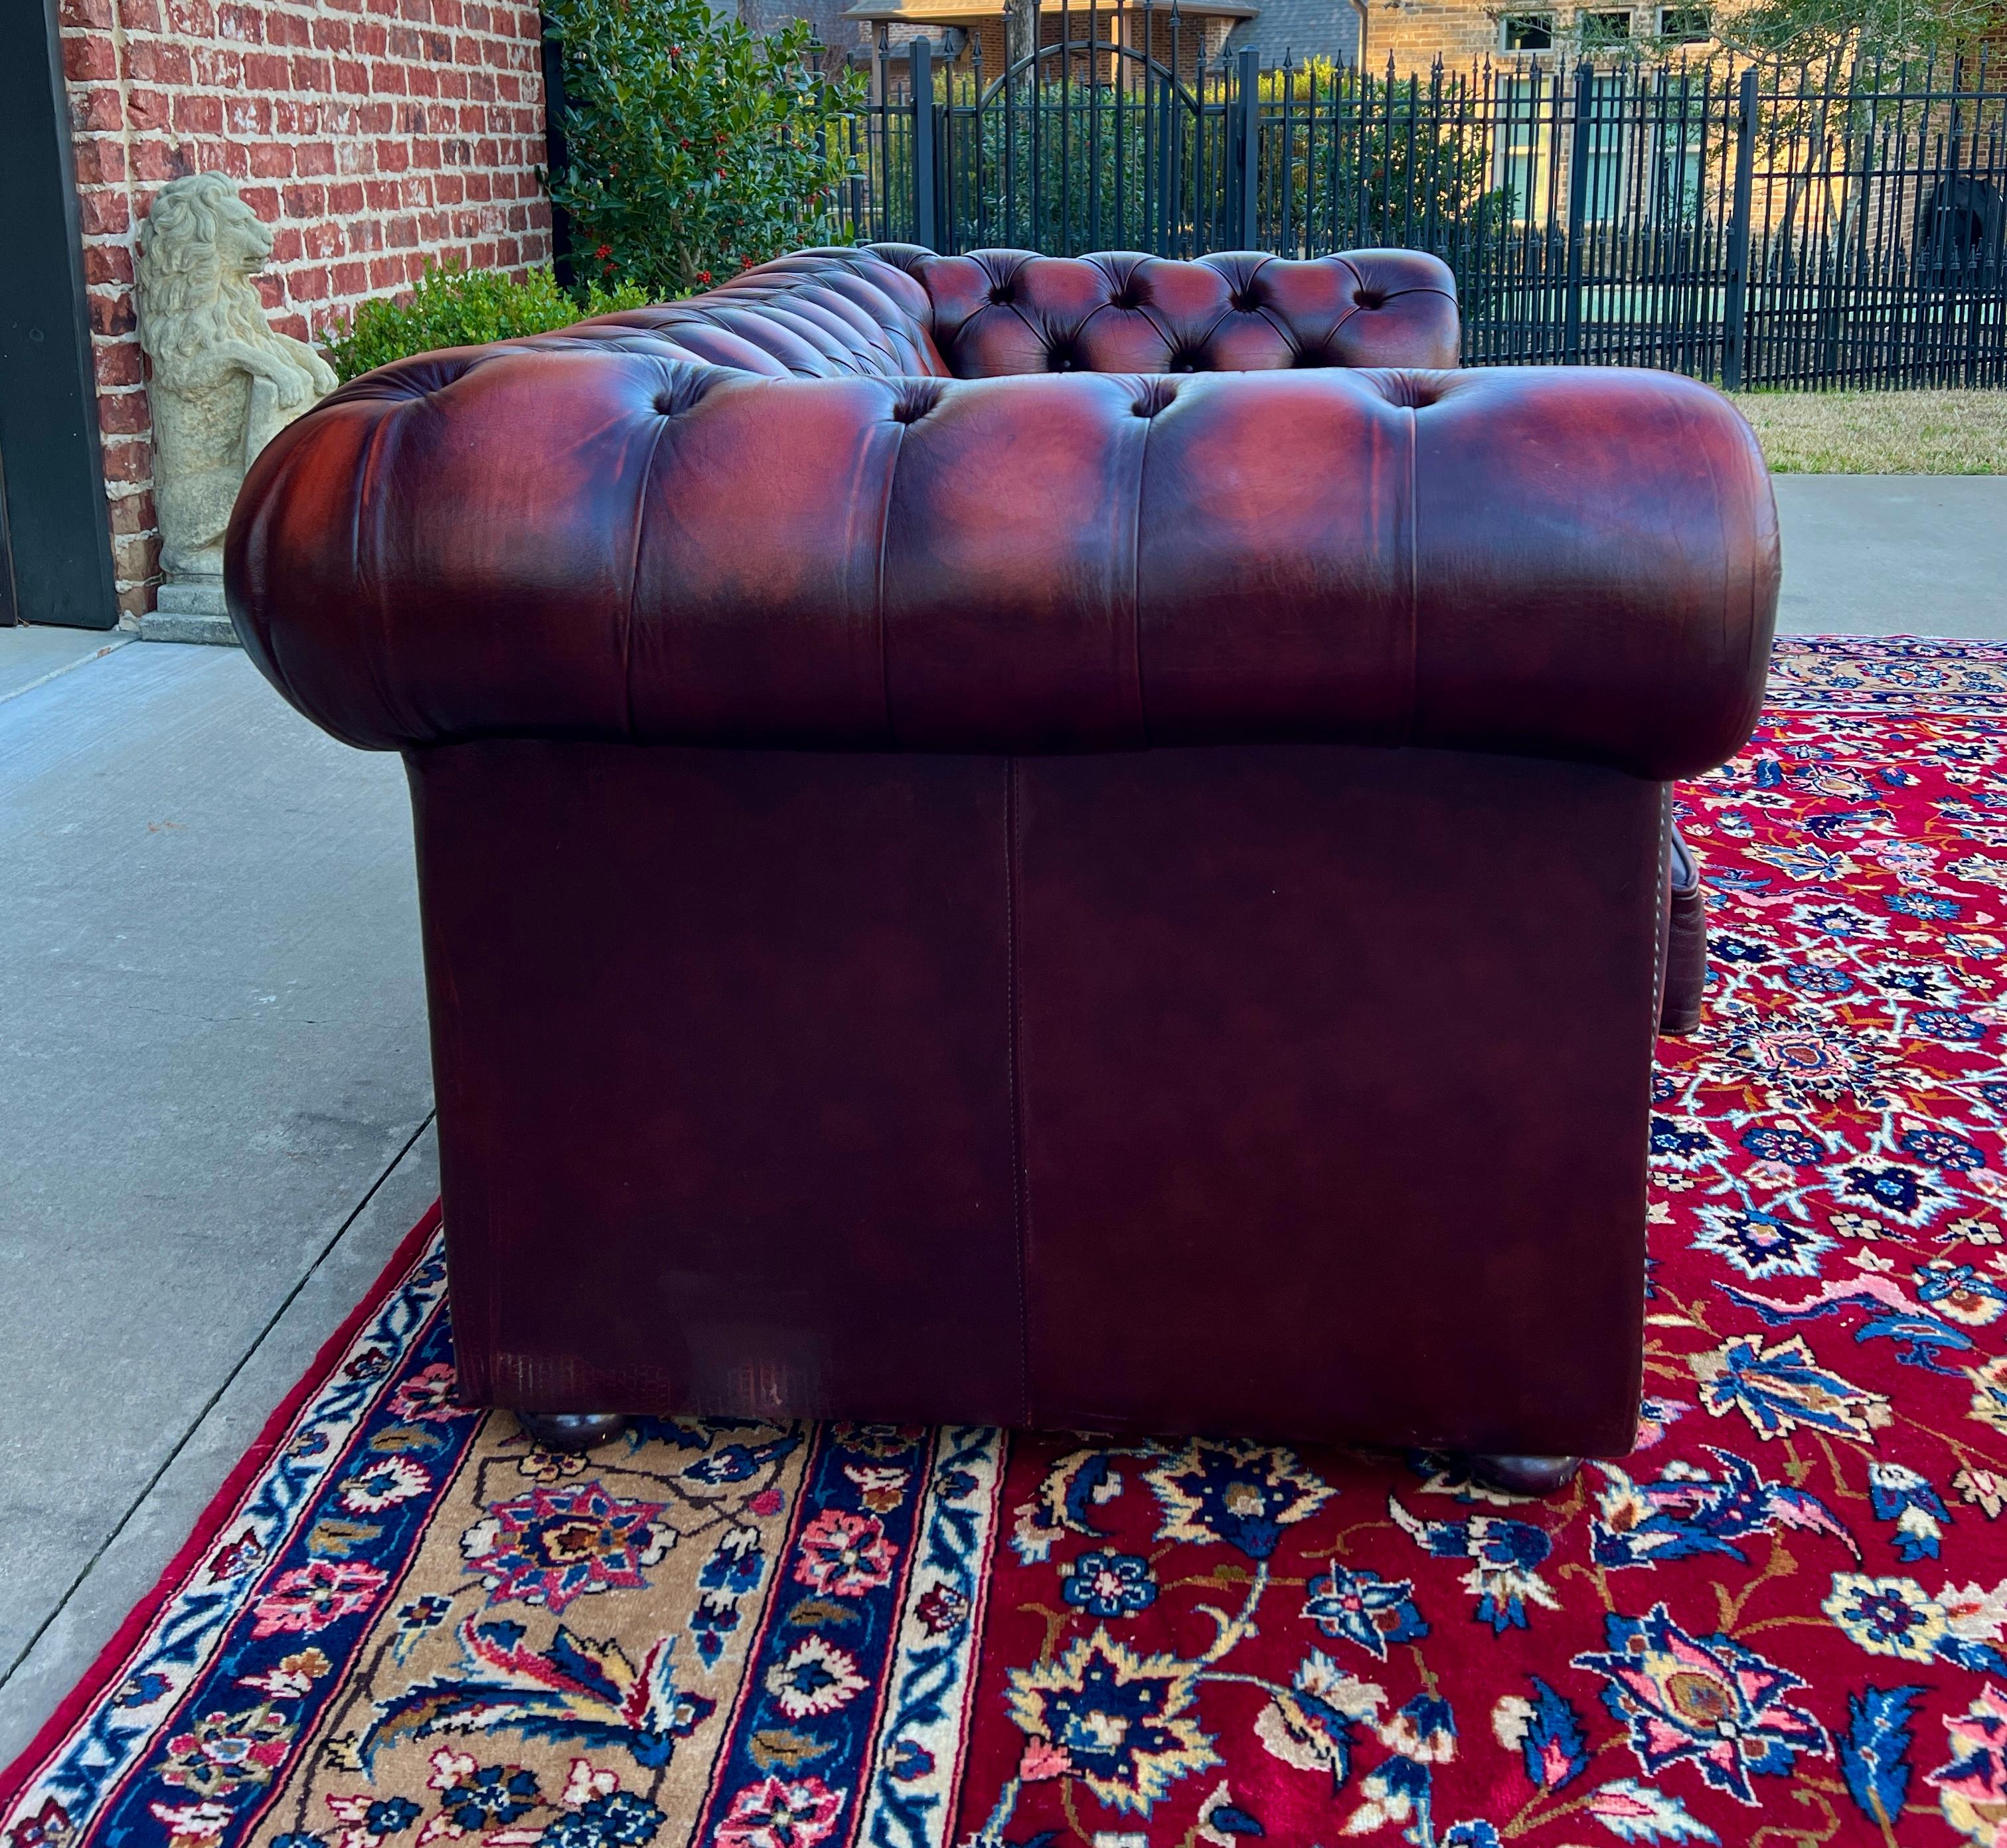 Vintage English Chesterfield Leather Tufted Love Seat Sofa Oxblood Red #1 In Good Condition For Sale In Tyler, TX